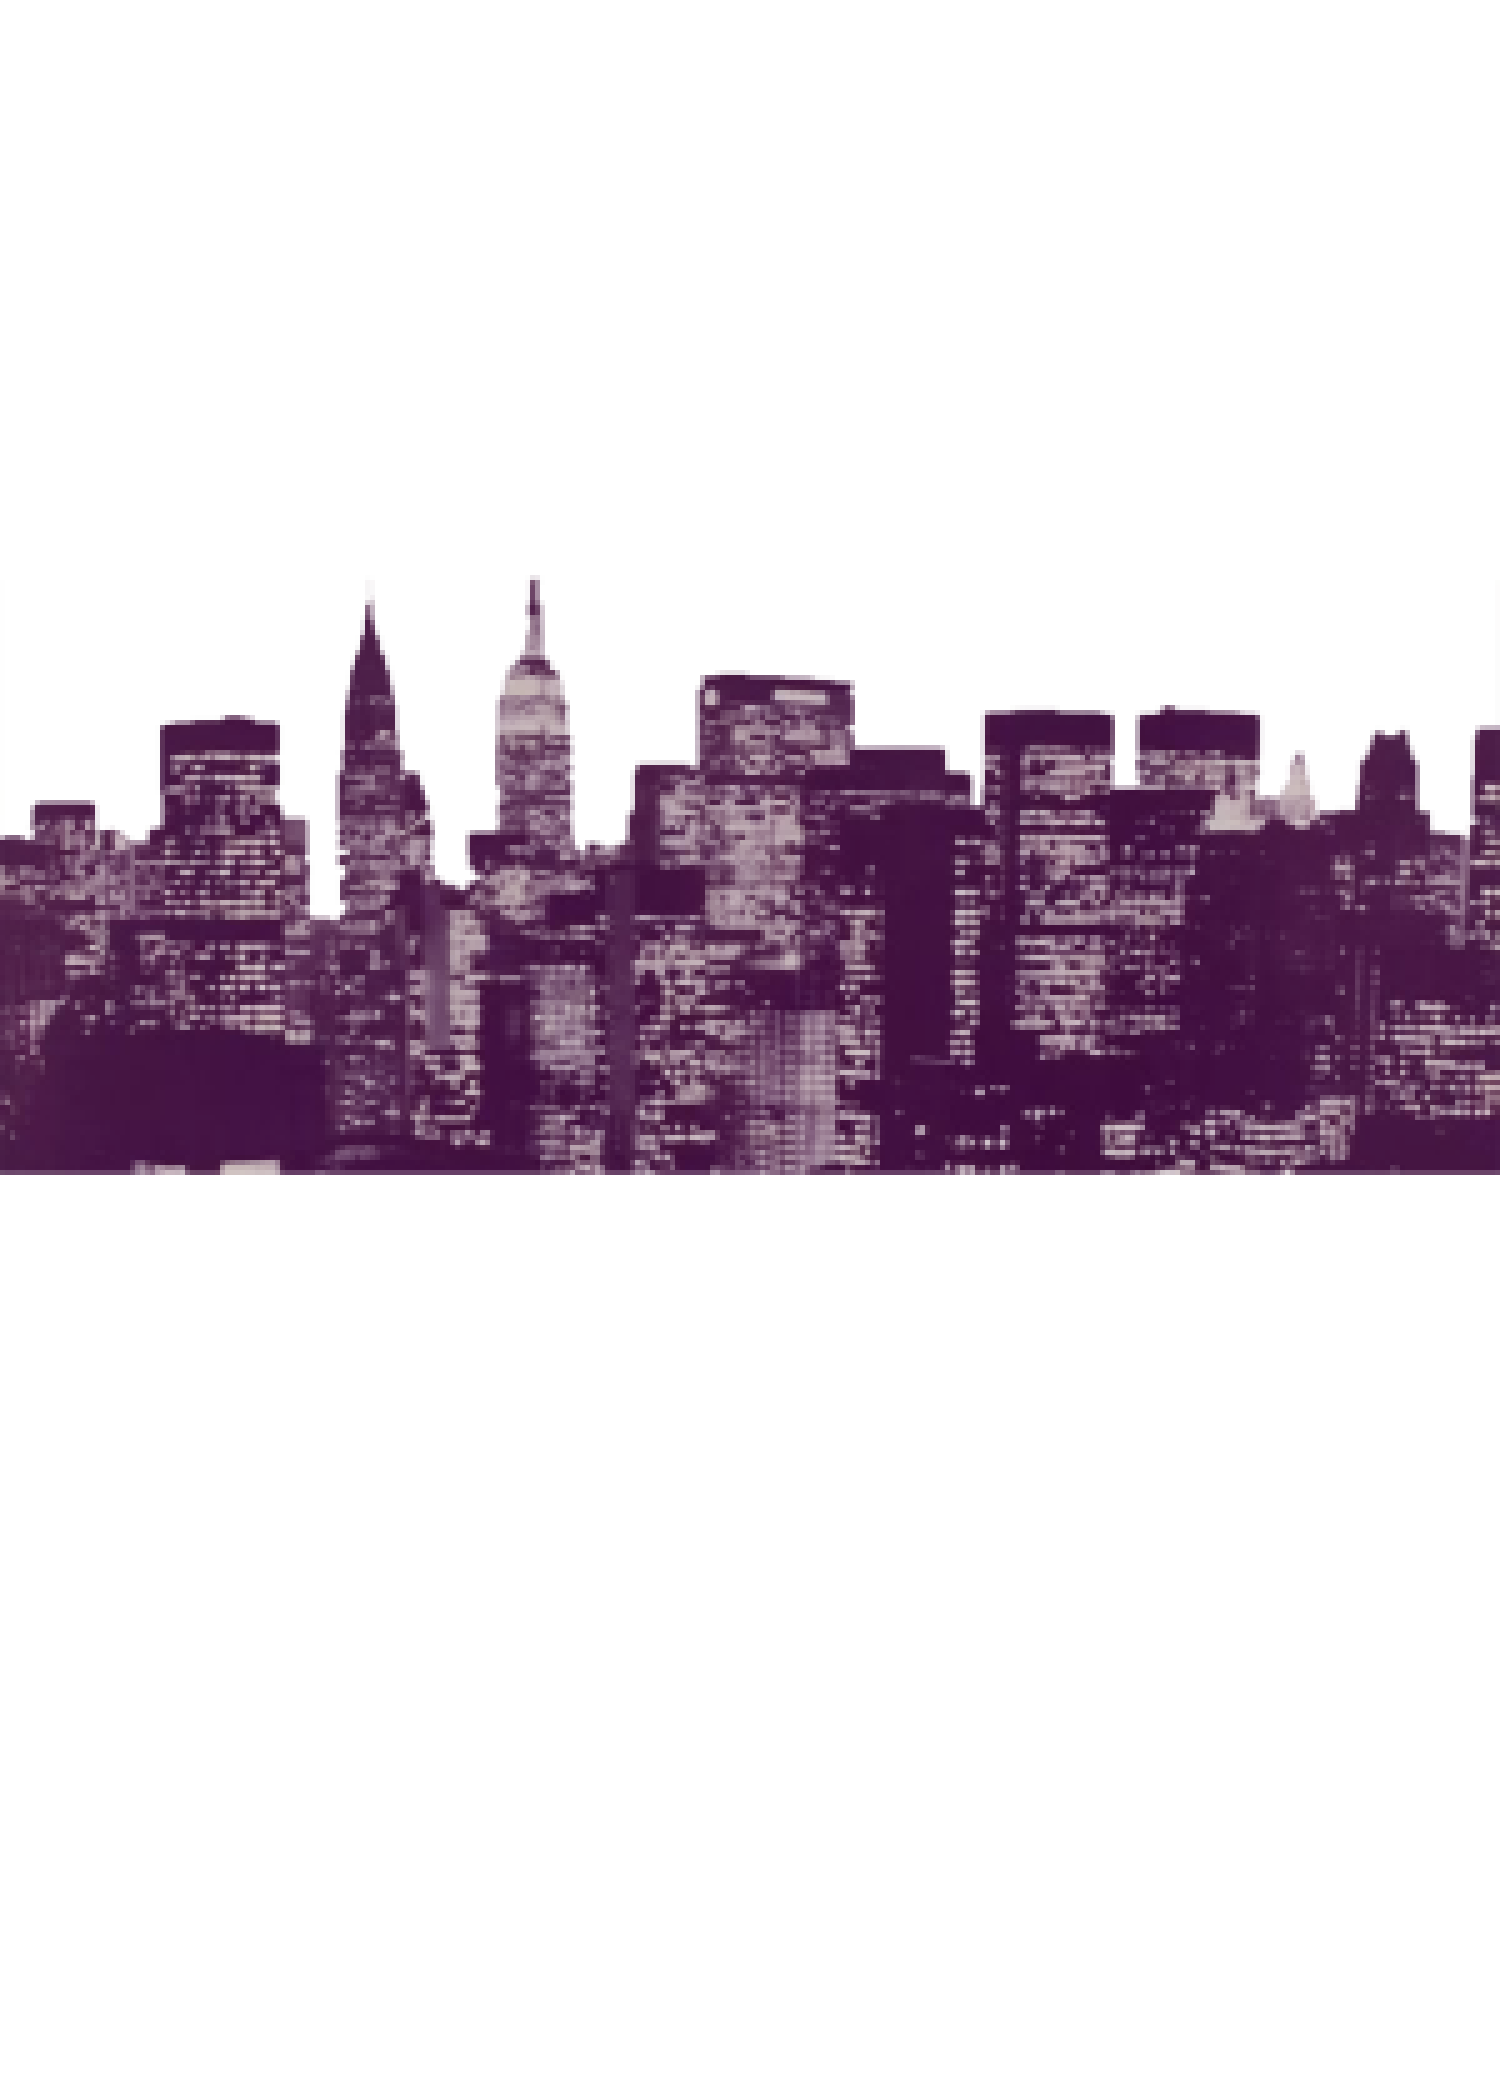 Placed behind the first collage is a second, hazier view of the New York City skyline. It's dyed a deep purple and clings like a shadow to the webpage.